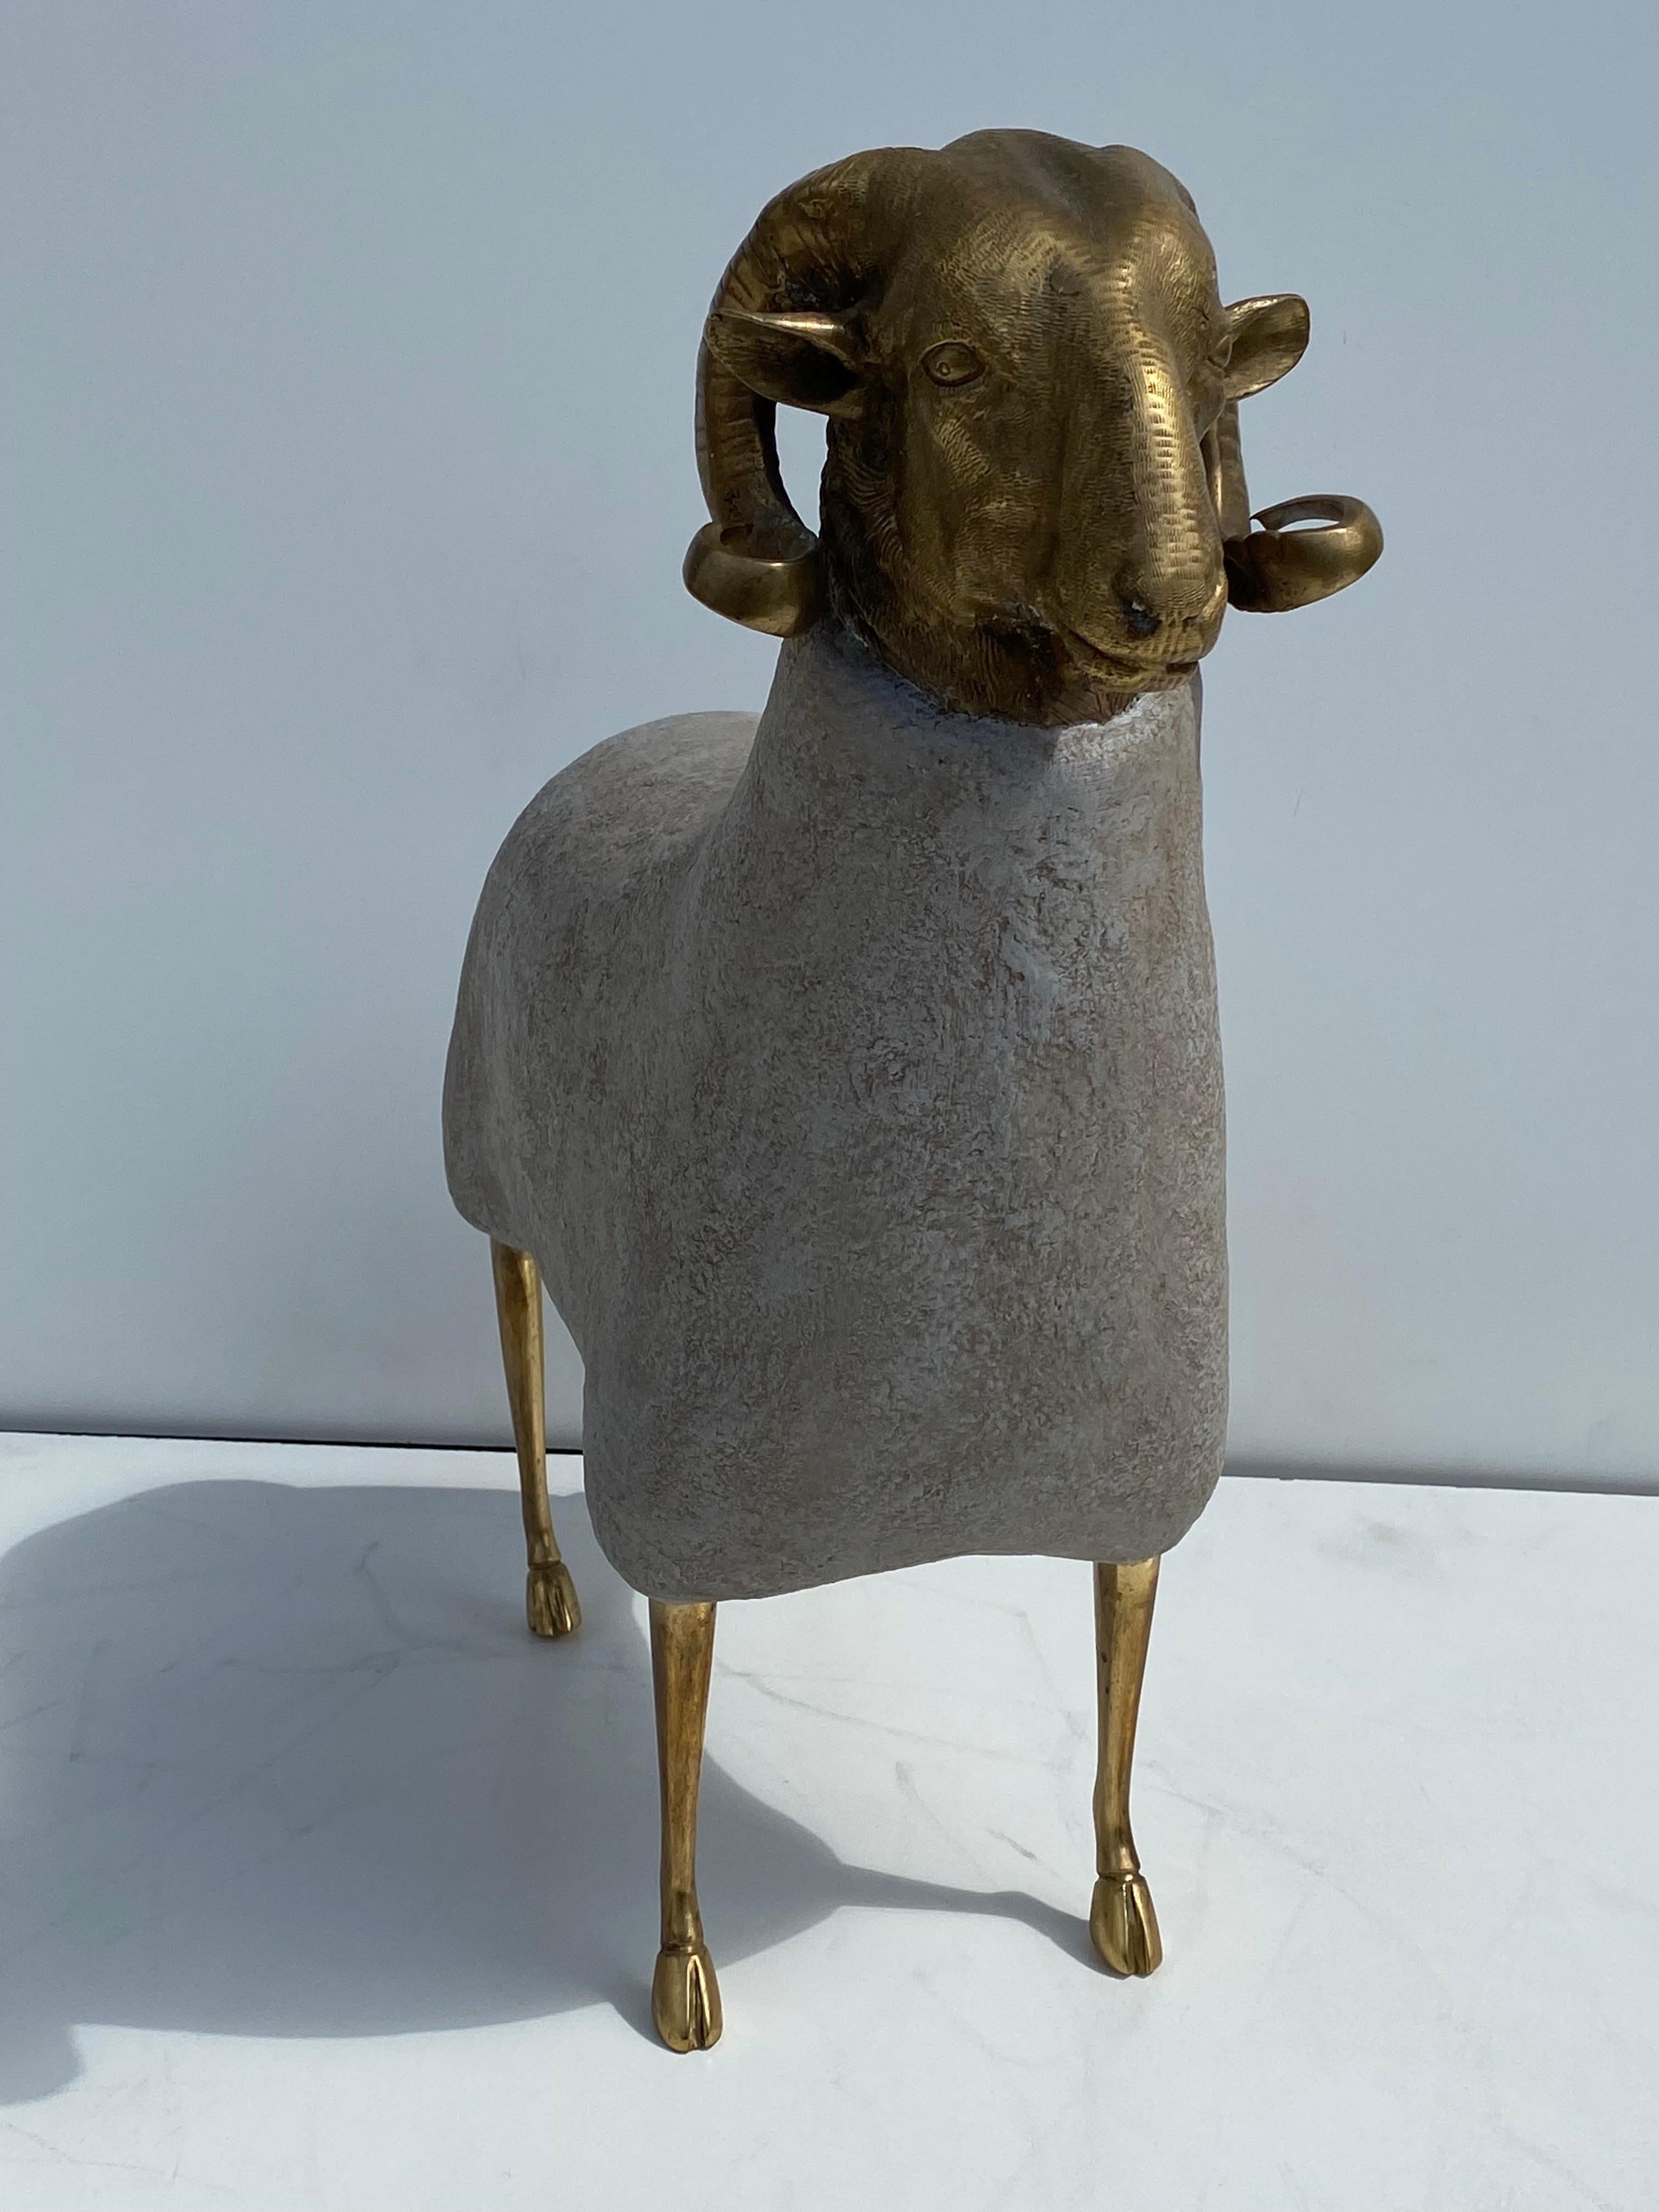 Brass and faux concrete ram / sheep sculpture.  Suitable for indoor / outdoor but not advised to leave under the rain for a long period of time.